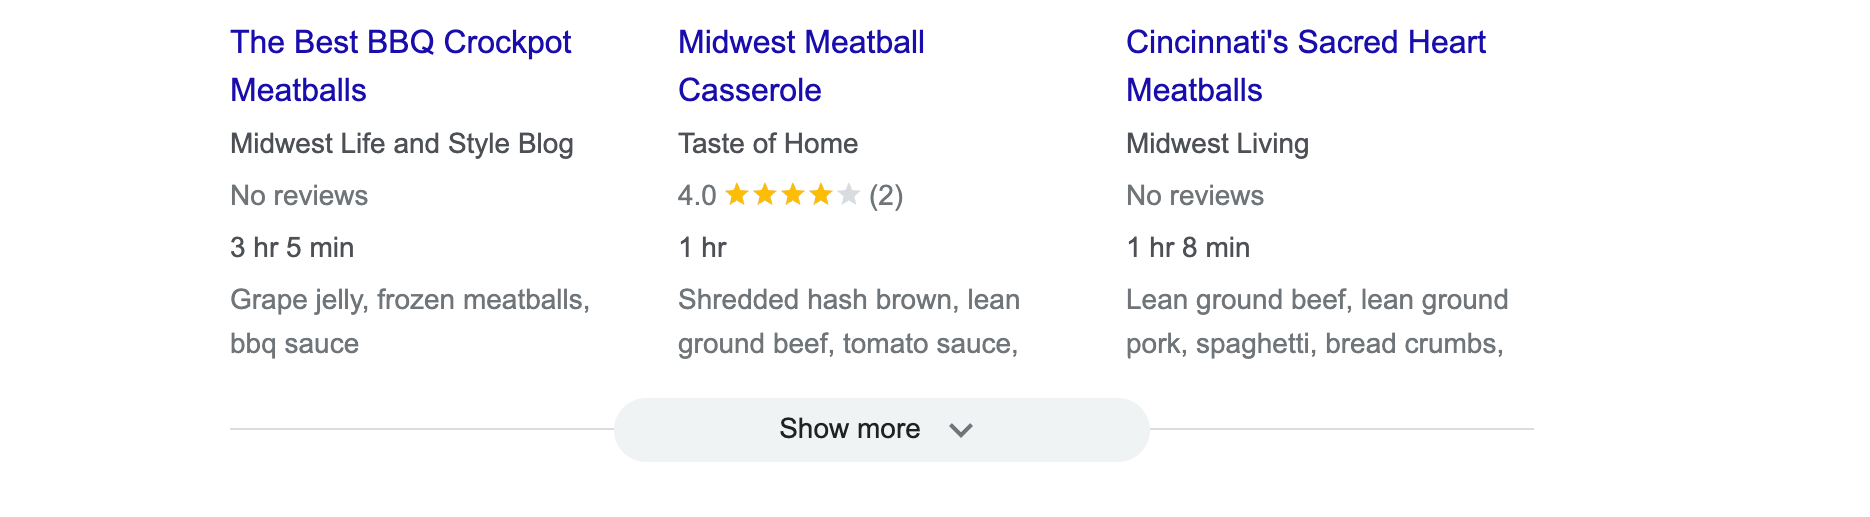 different meatball recipe search results